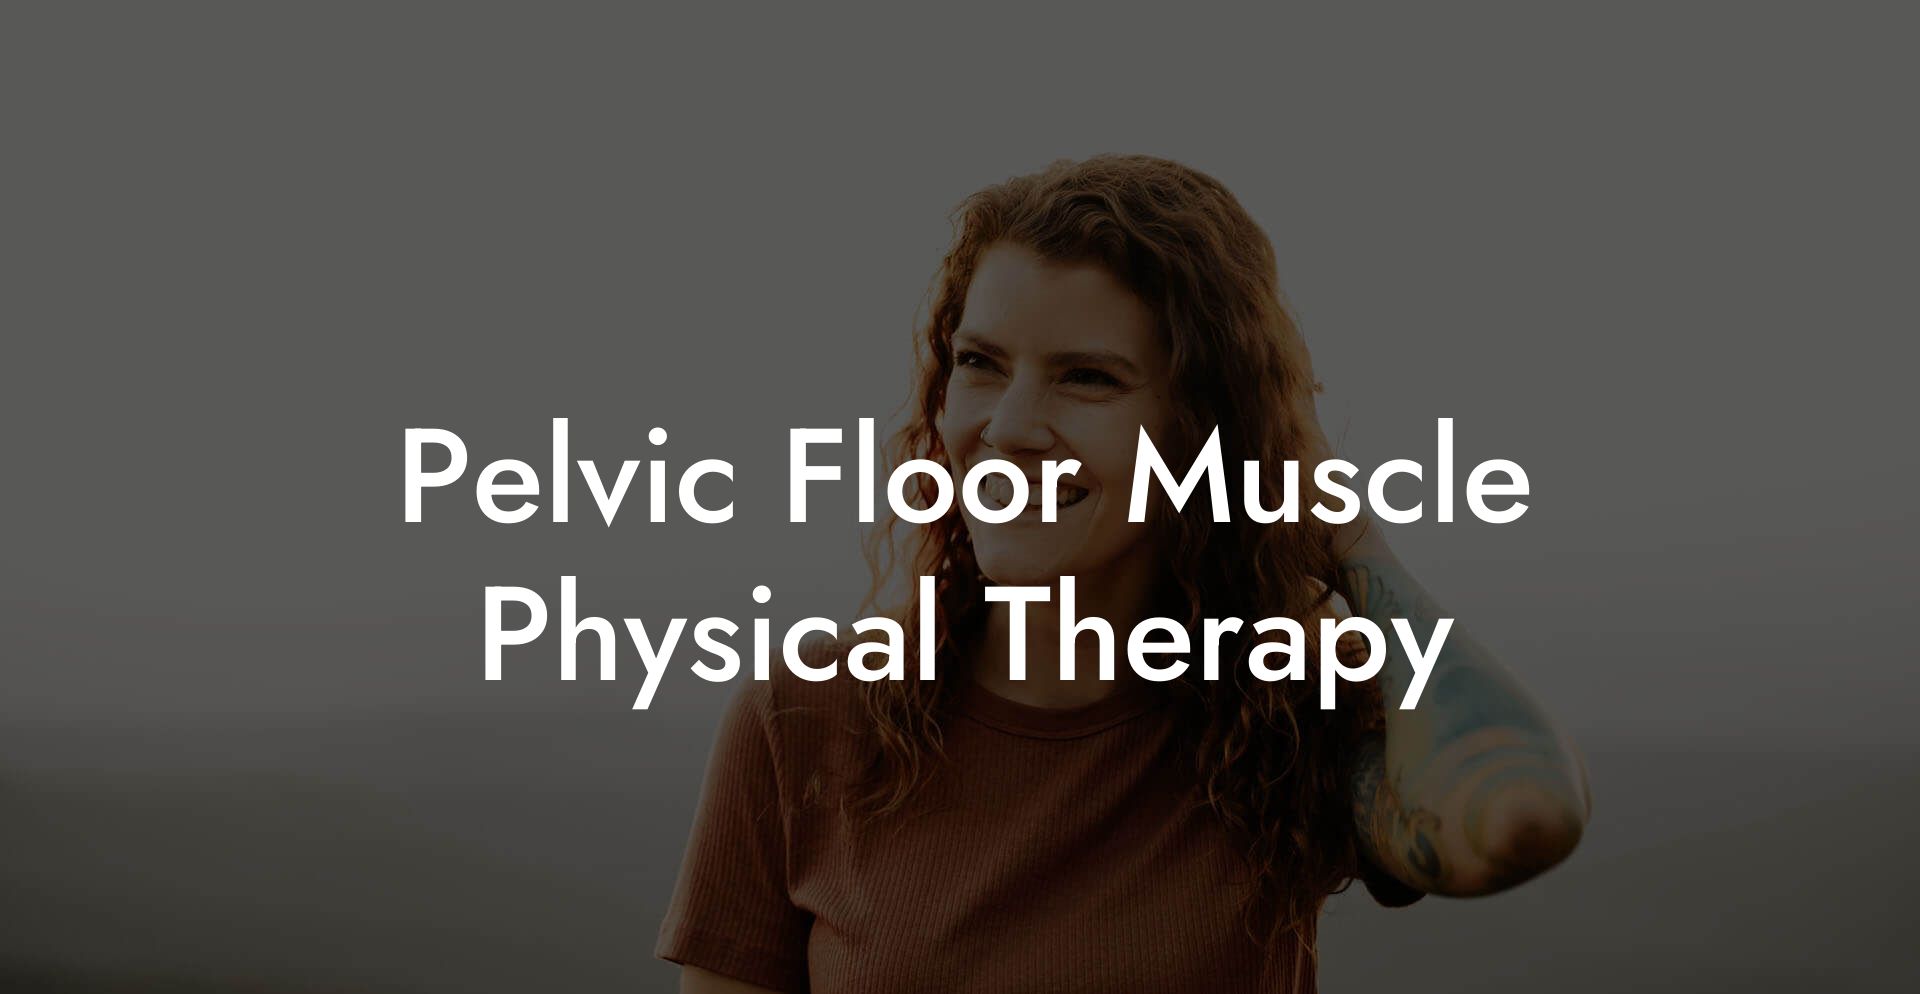 Pelvic Floor Muscle Physical Therapy